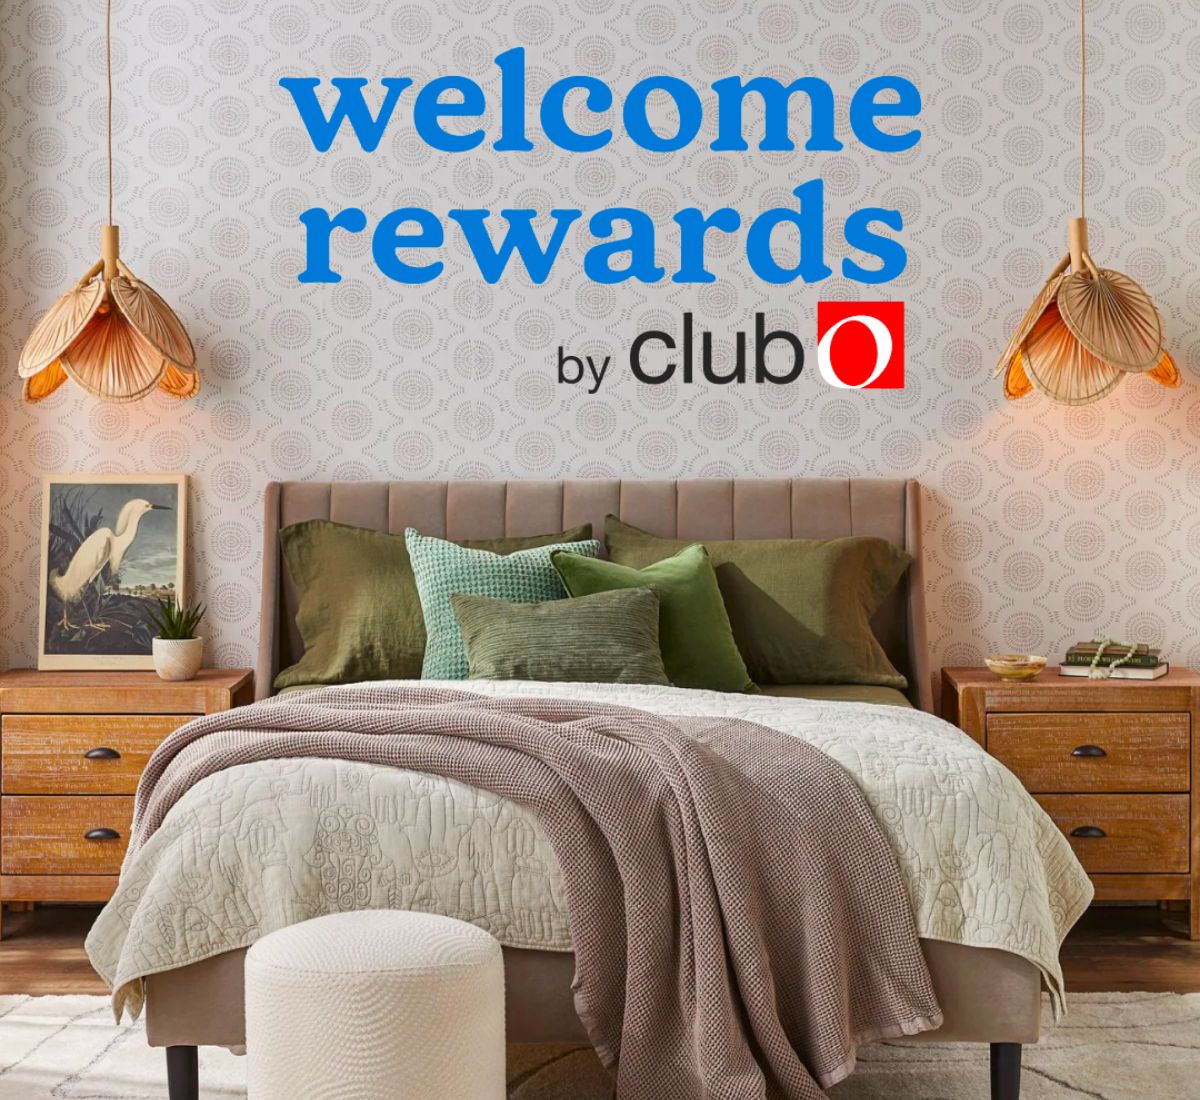 an image of a bed set up in a room with night tables and an ottoman at the foot of the bed with Welcome rewards club O in text across the top of the image